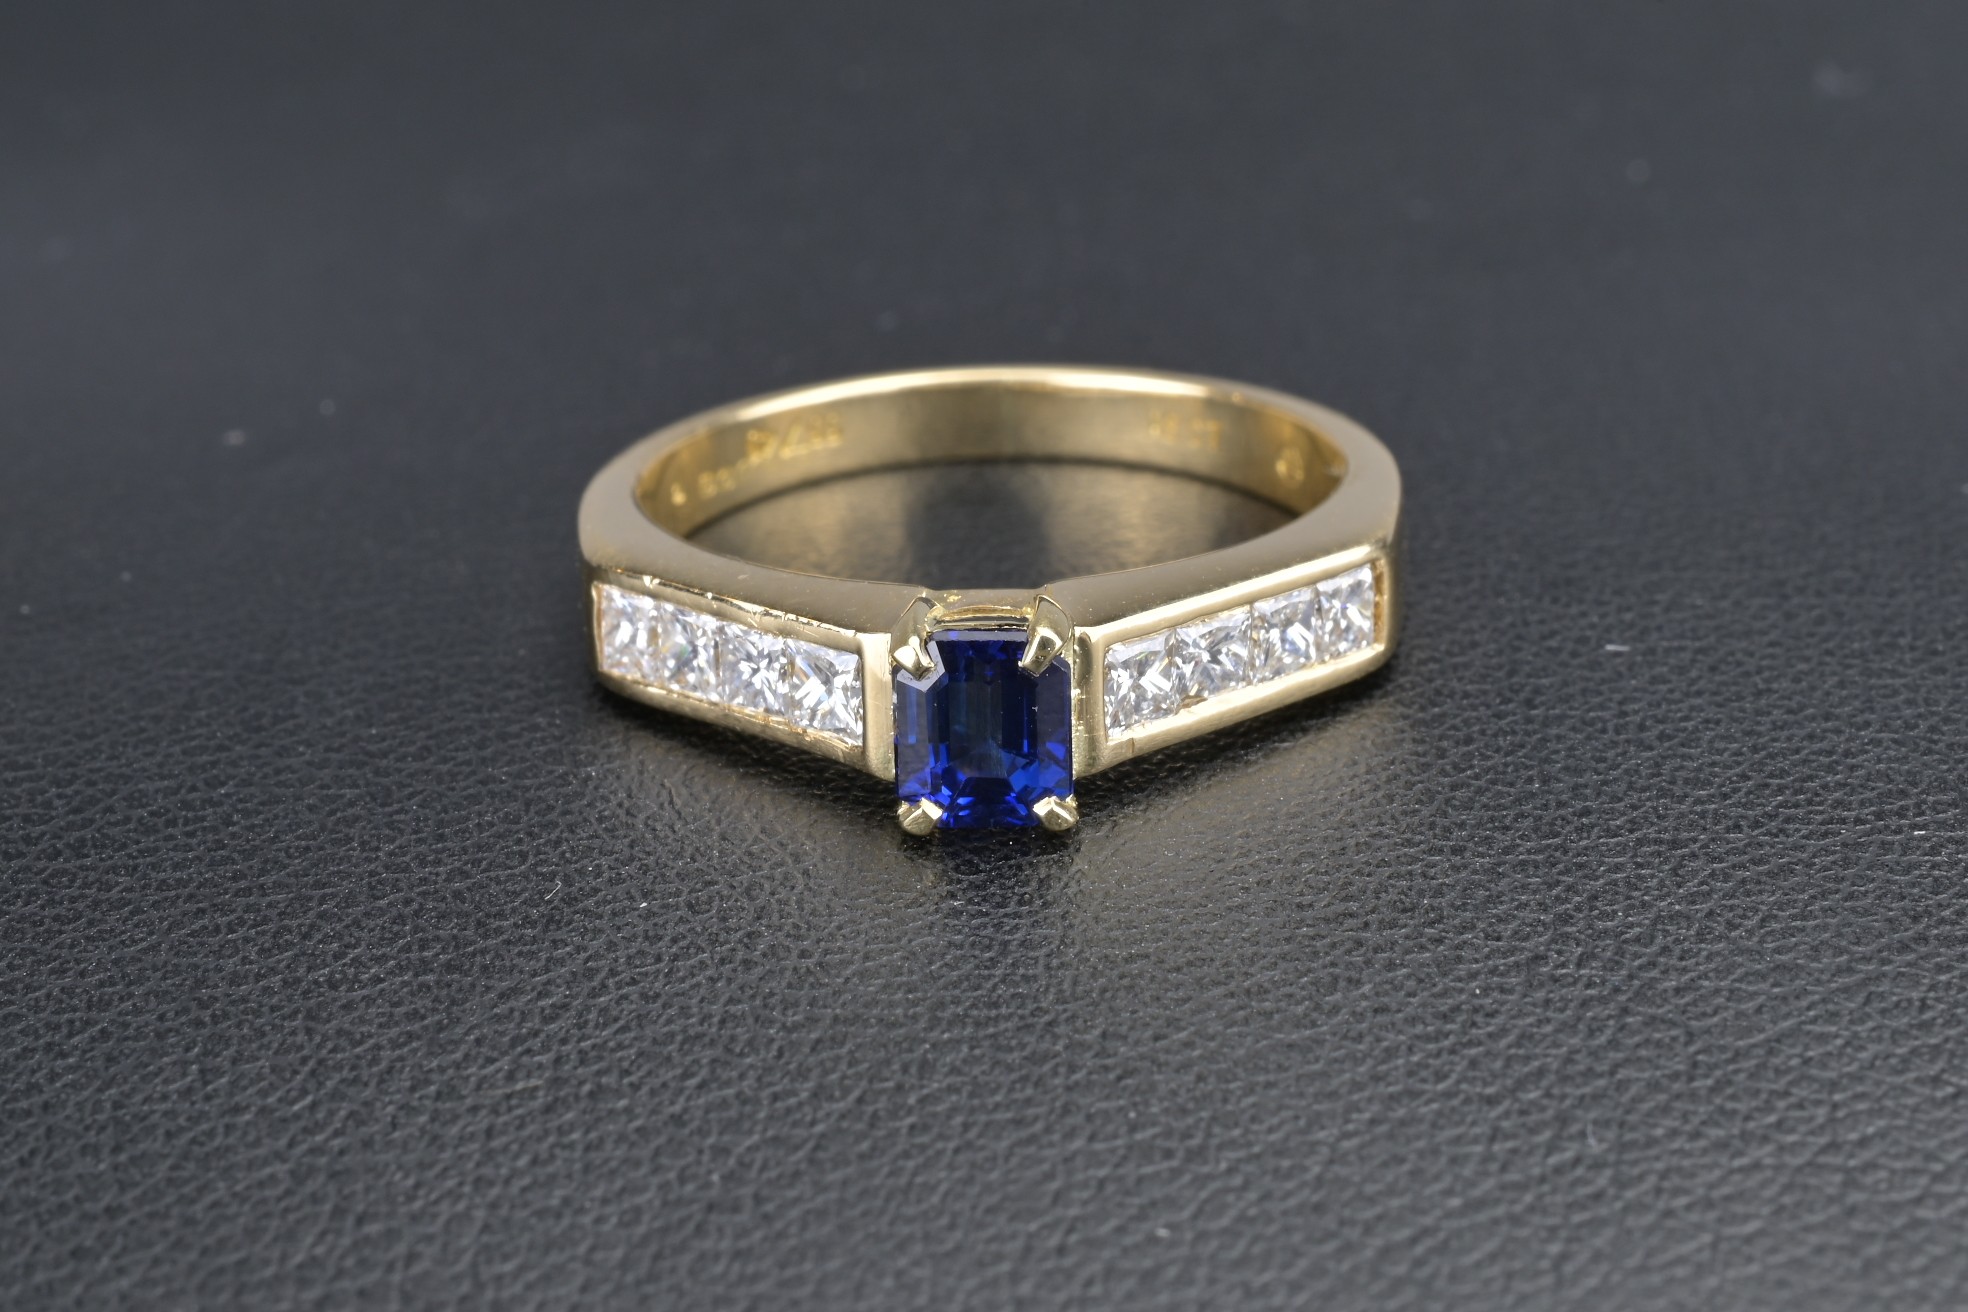 AN 18CT DIAMOND AND SAPPHIRE DRESS RING. Emerald cut 0.63ct sapphire set in 18ct yellow gold with - Image 4 of 8